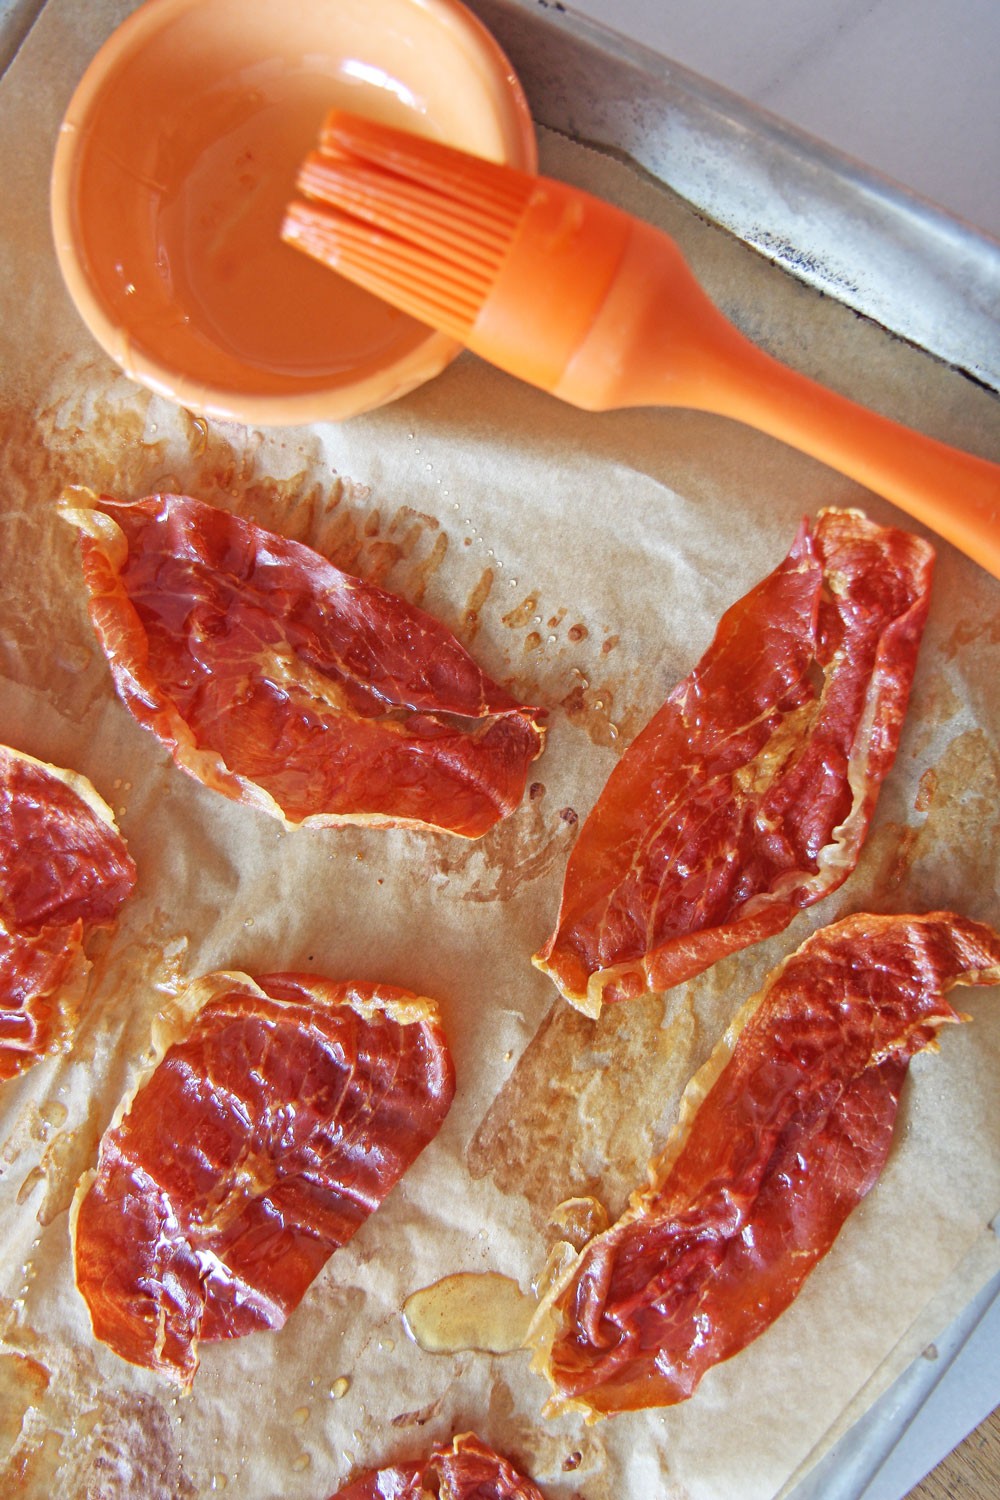 Sheet Pan Crispy Honey Prosciutto Recipe. This is a simple sheet pan recipe. The ingredients are just prosciutto and honey. The key is to cook in a hot oven and enjoy. Perfect brunch recipe, with eggs, or as a BLT. Happy Cooking! #sheetpanrecipe #proscuitto